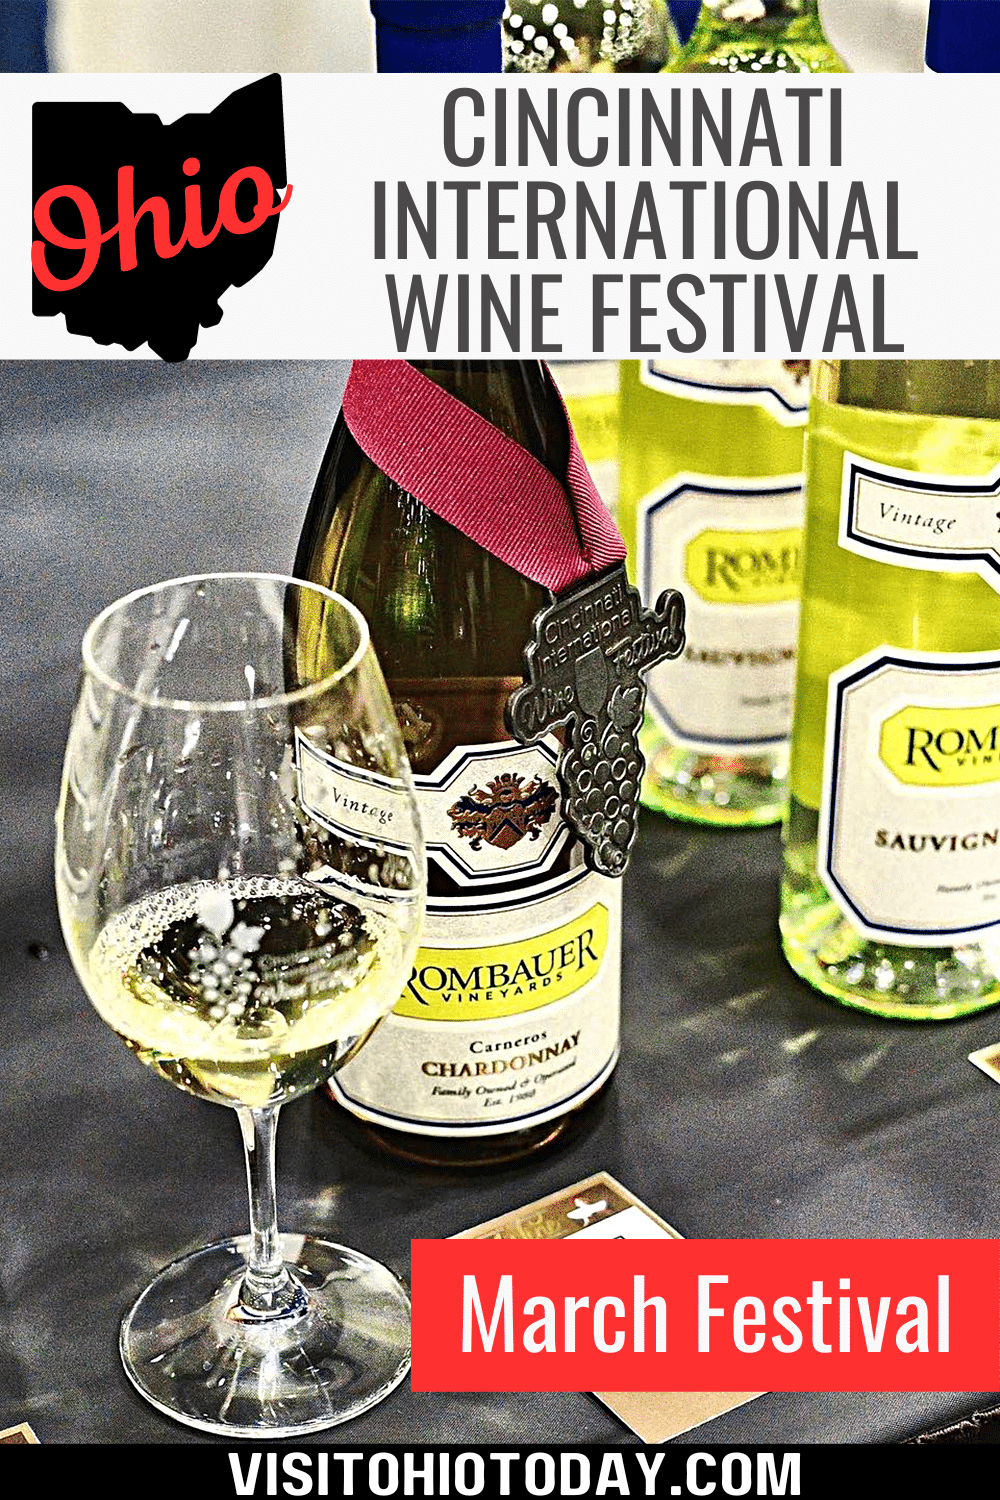 The Cincinnati International Wine Festival is held in early March at the Duke Energy Convention Center. The event showcases a global selection of wines through tastings, dinners, and a silent auction.